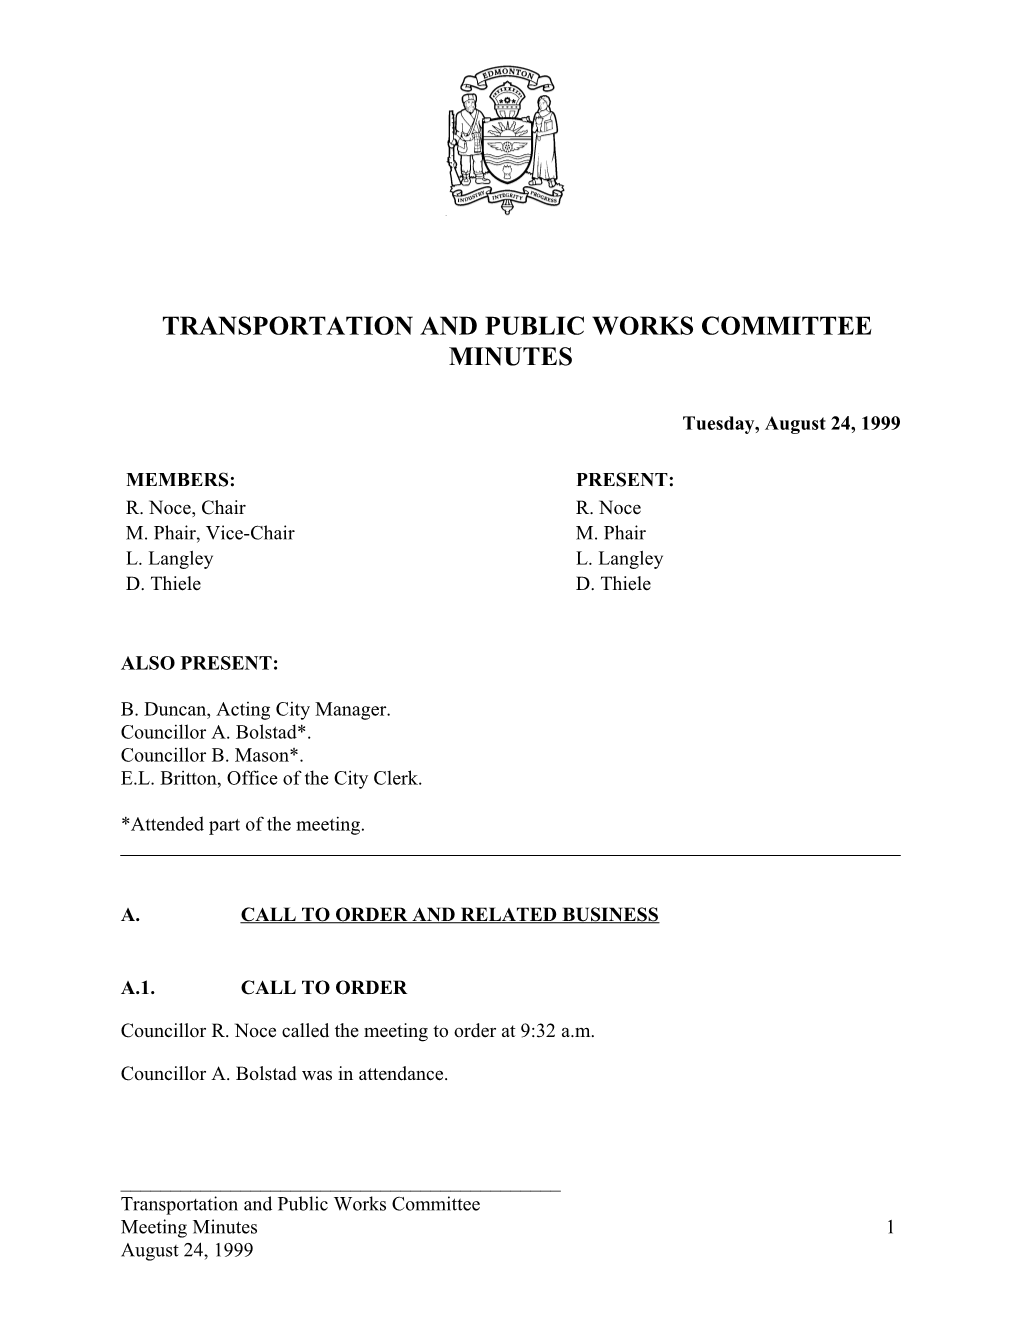 Minutes for Transportation and Public Works Committee August 24, 1999 Meeting